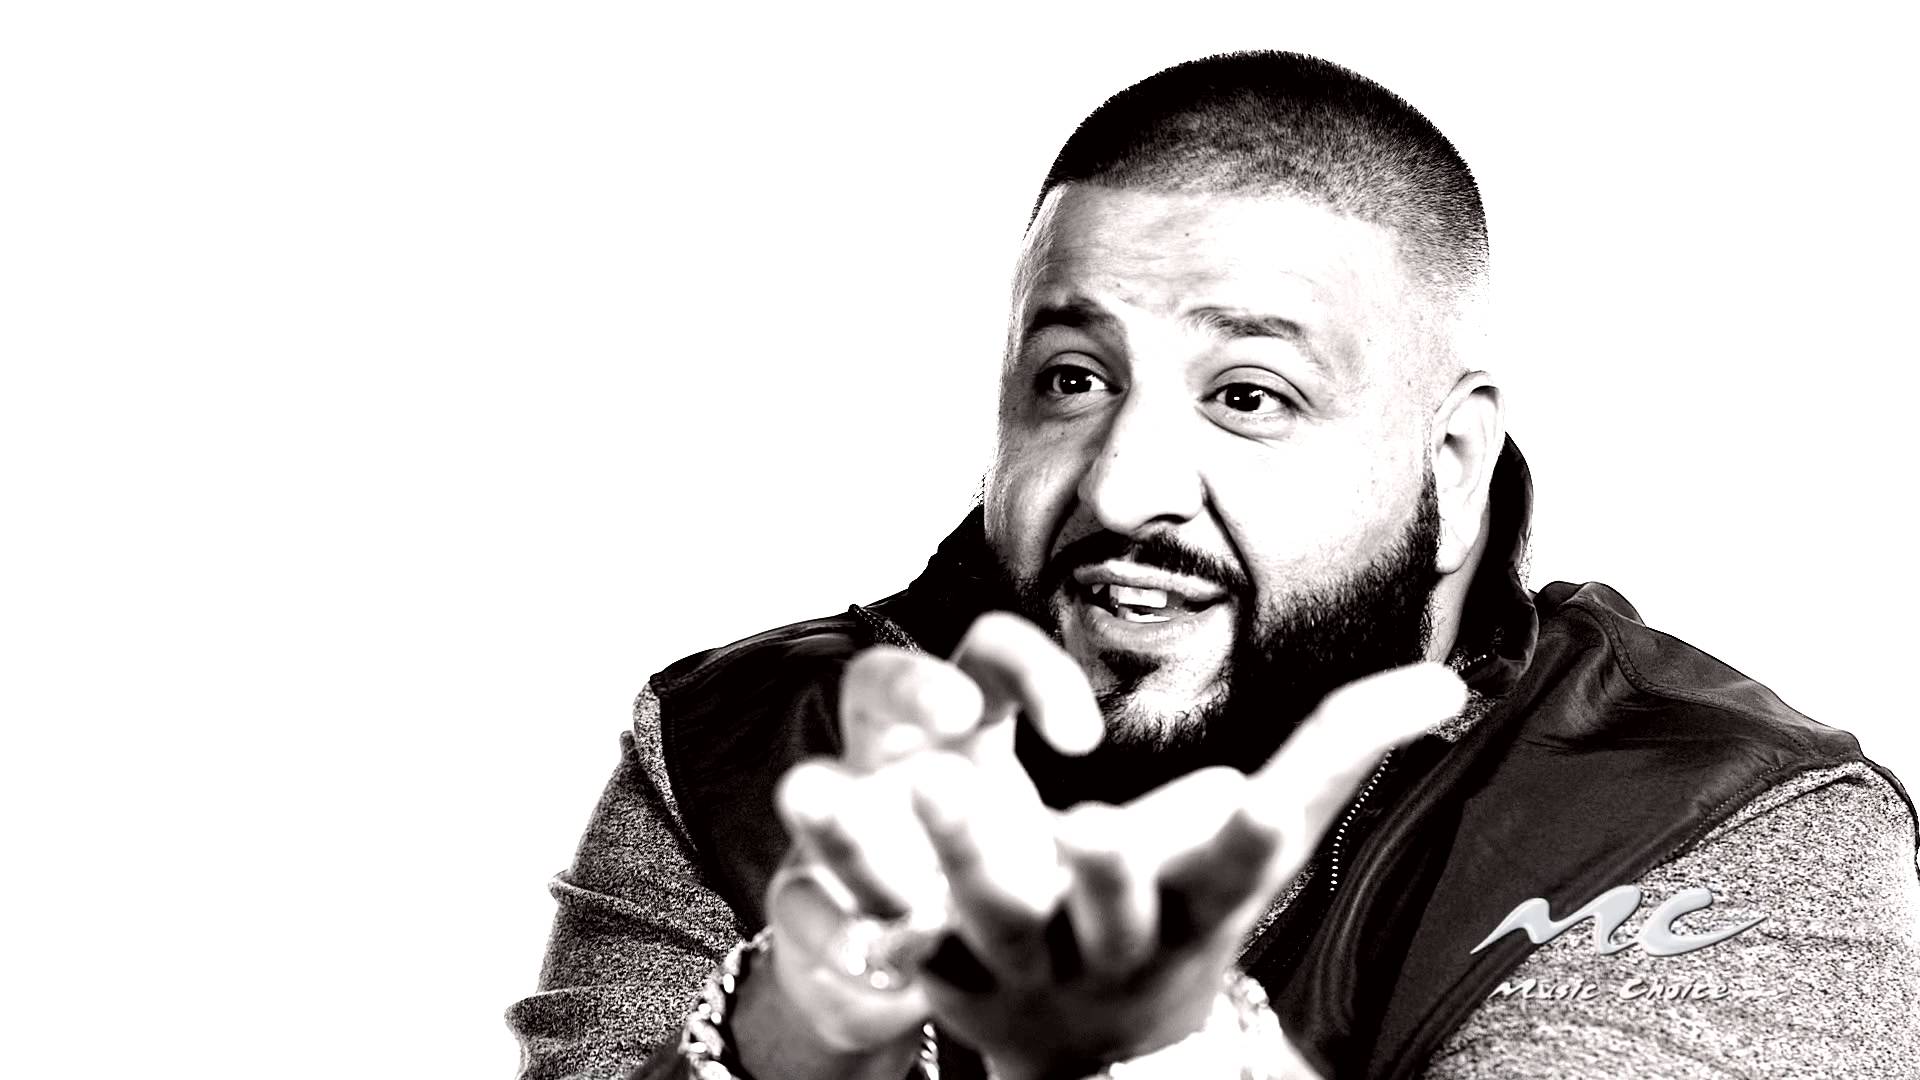 In just 90 seconds, DJ Khaled will affirm your whole life